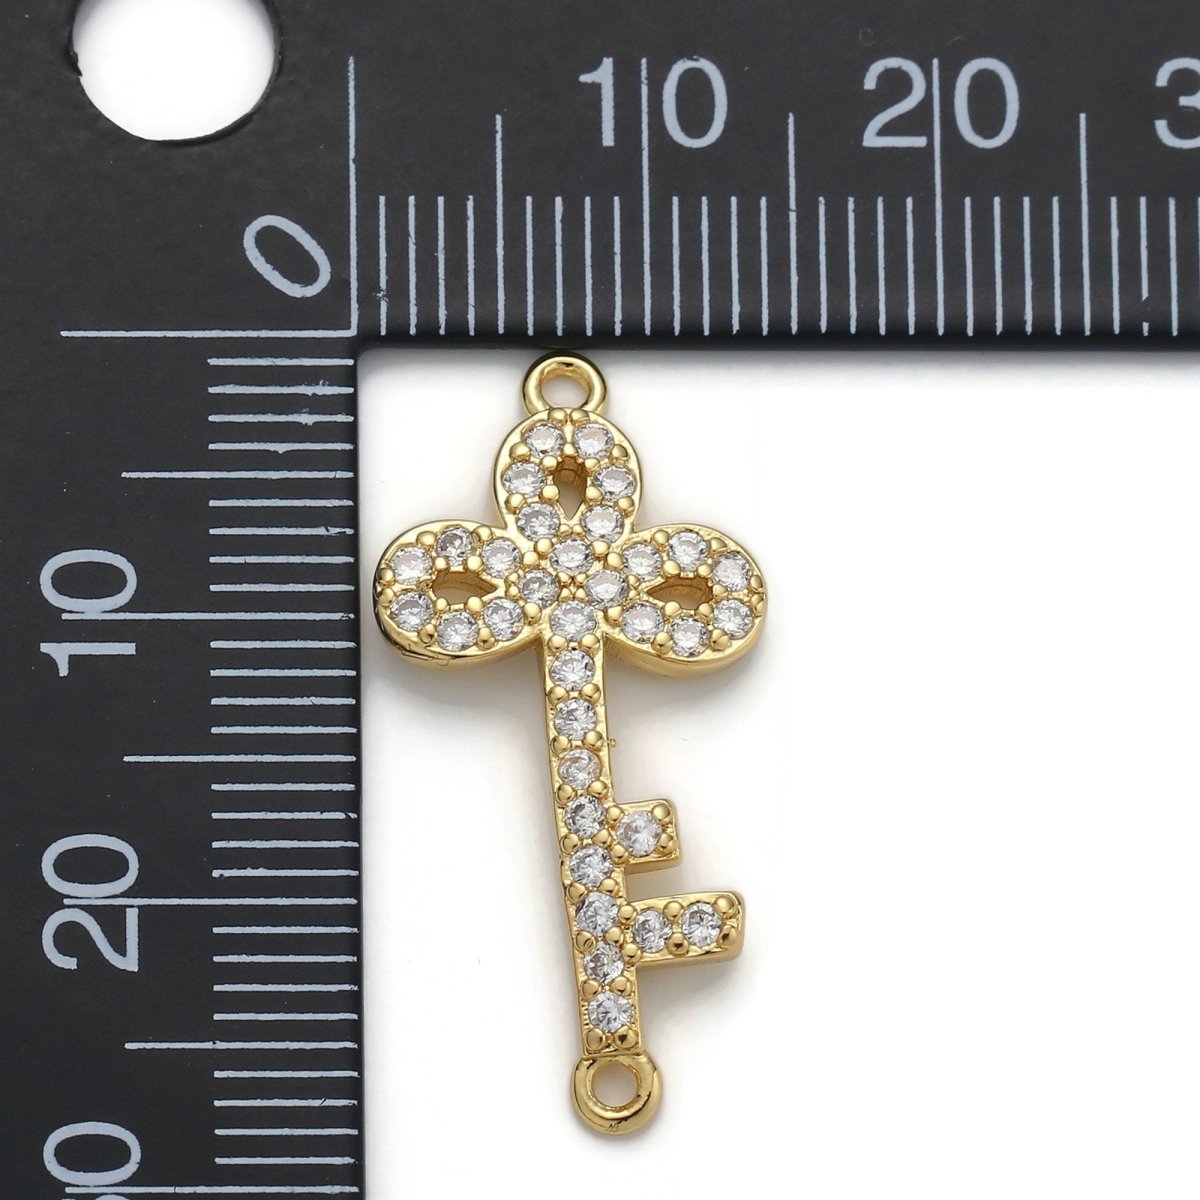 24k Gold Filled Micro Pave Key Charm, Cubic Zirconia Key Pendant Charm, Gold Filled Charm, For DIY Jewelry D-034 - DLUXCA